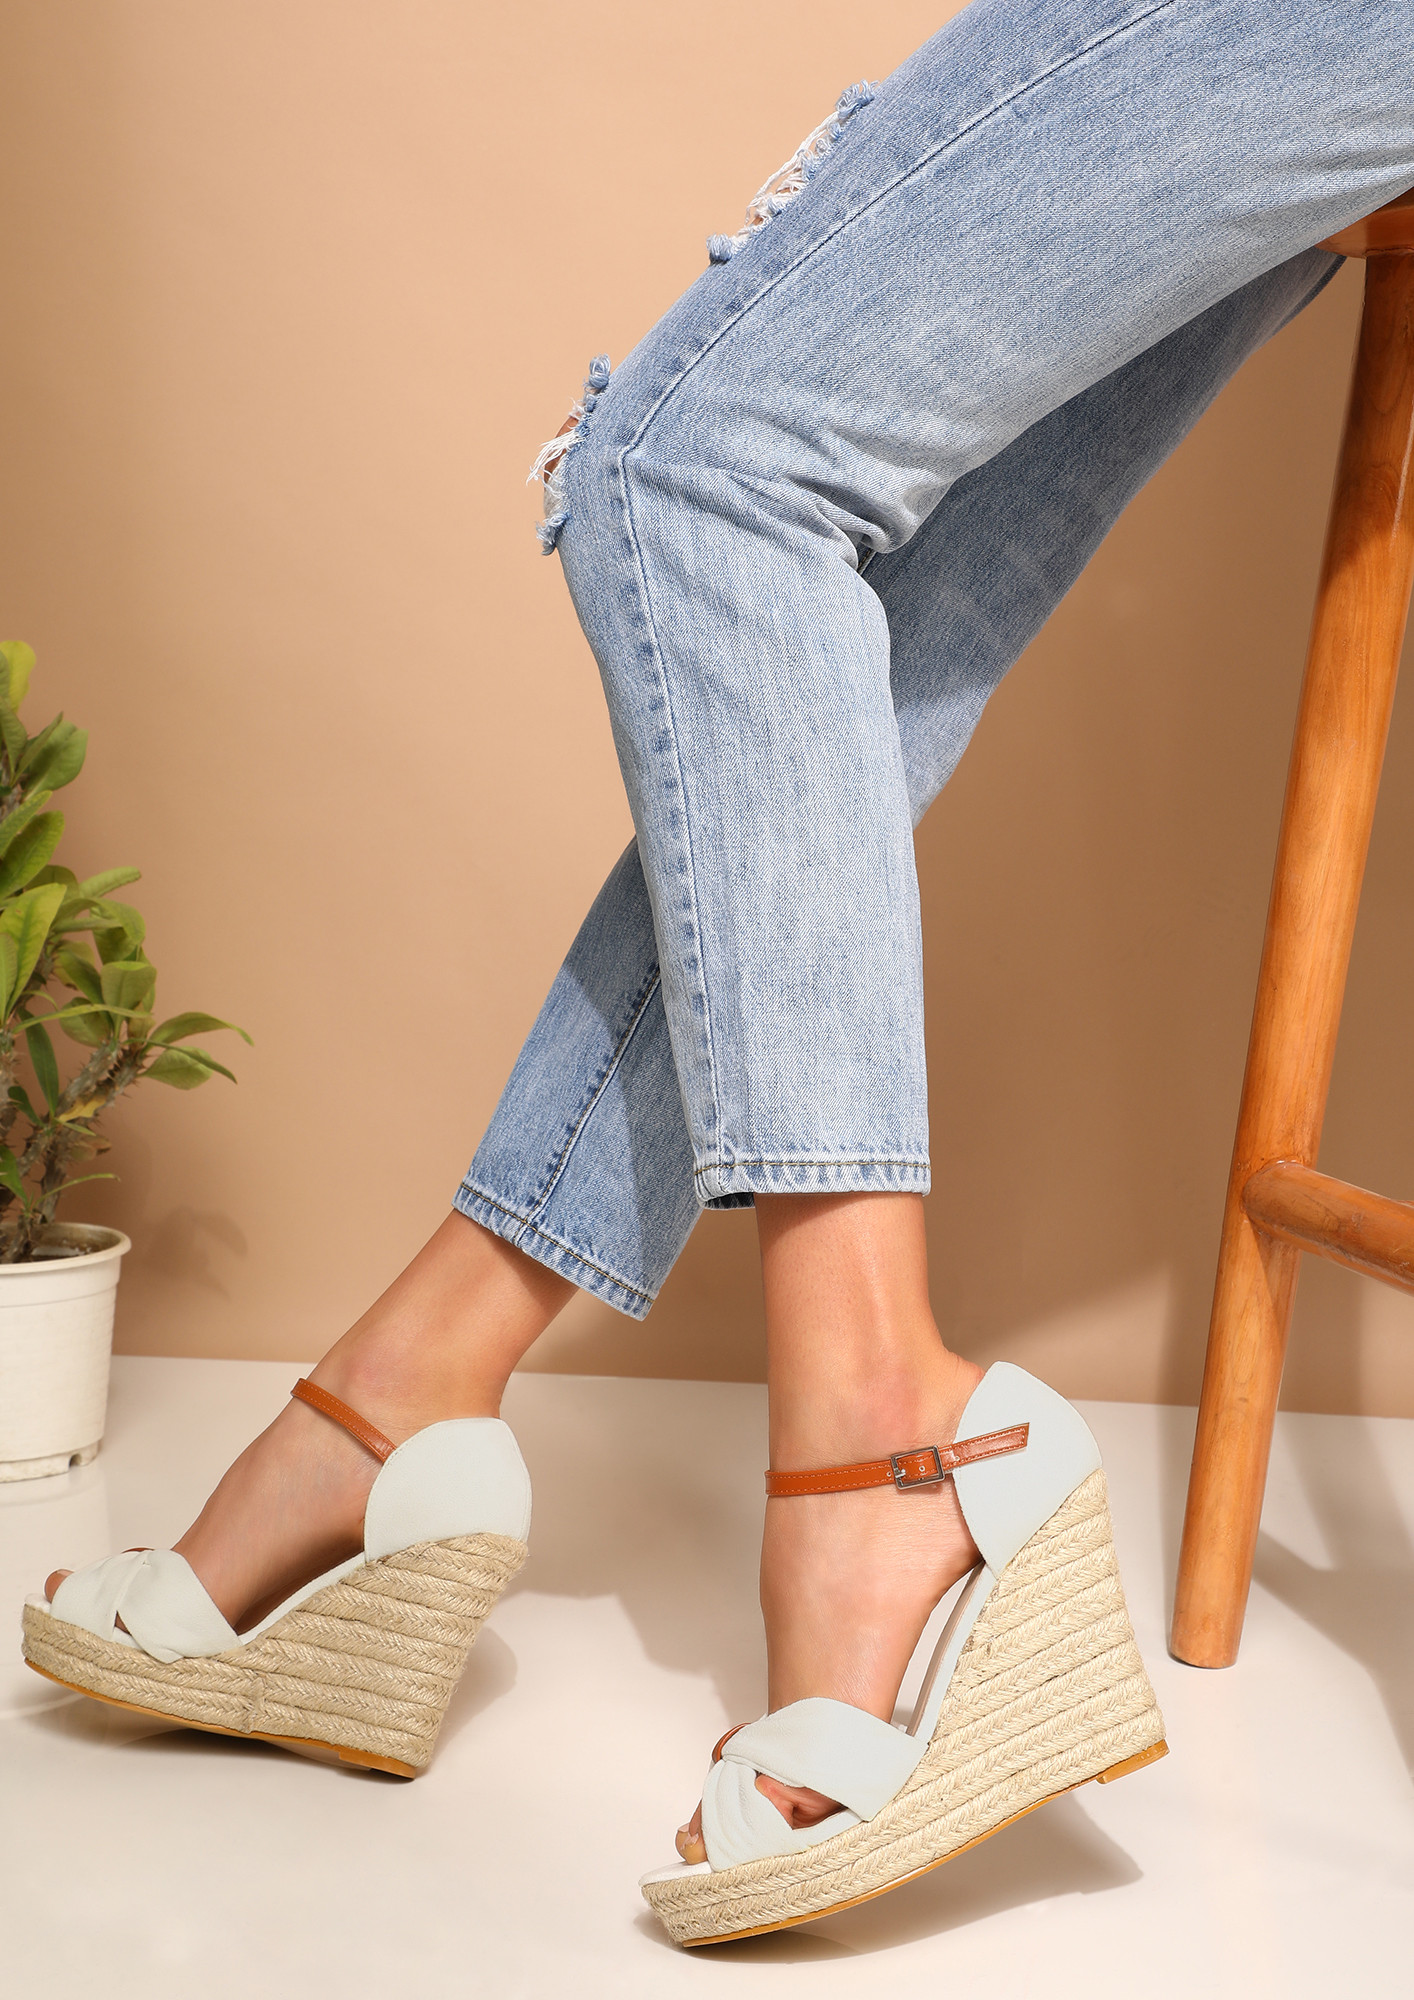 ON A HOLIDAY WHITE WEDGES